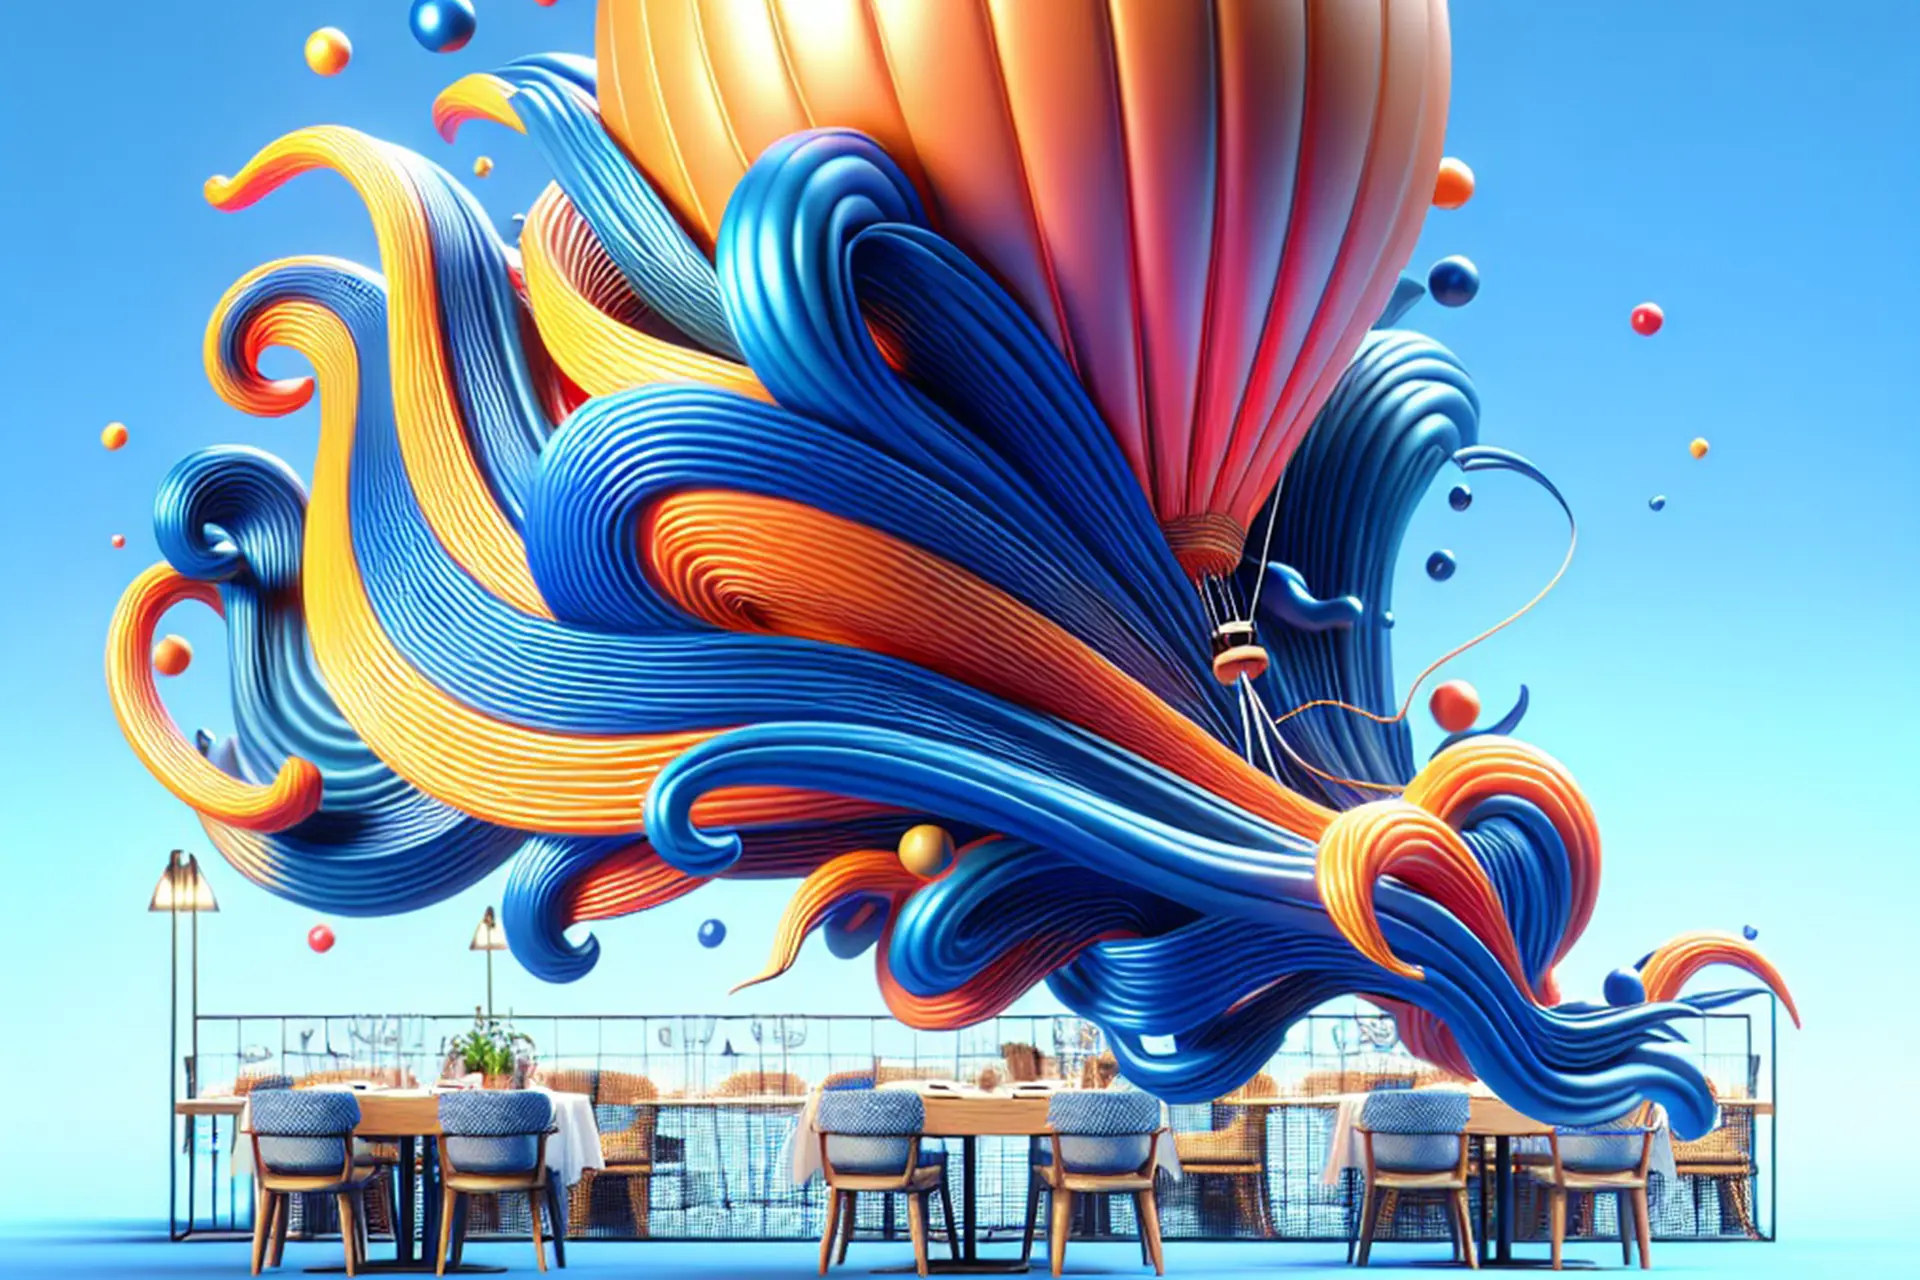 Modern restaurant table with artistic balloon decoration and coloured waves